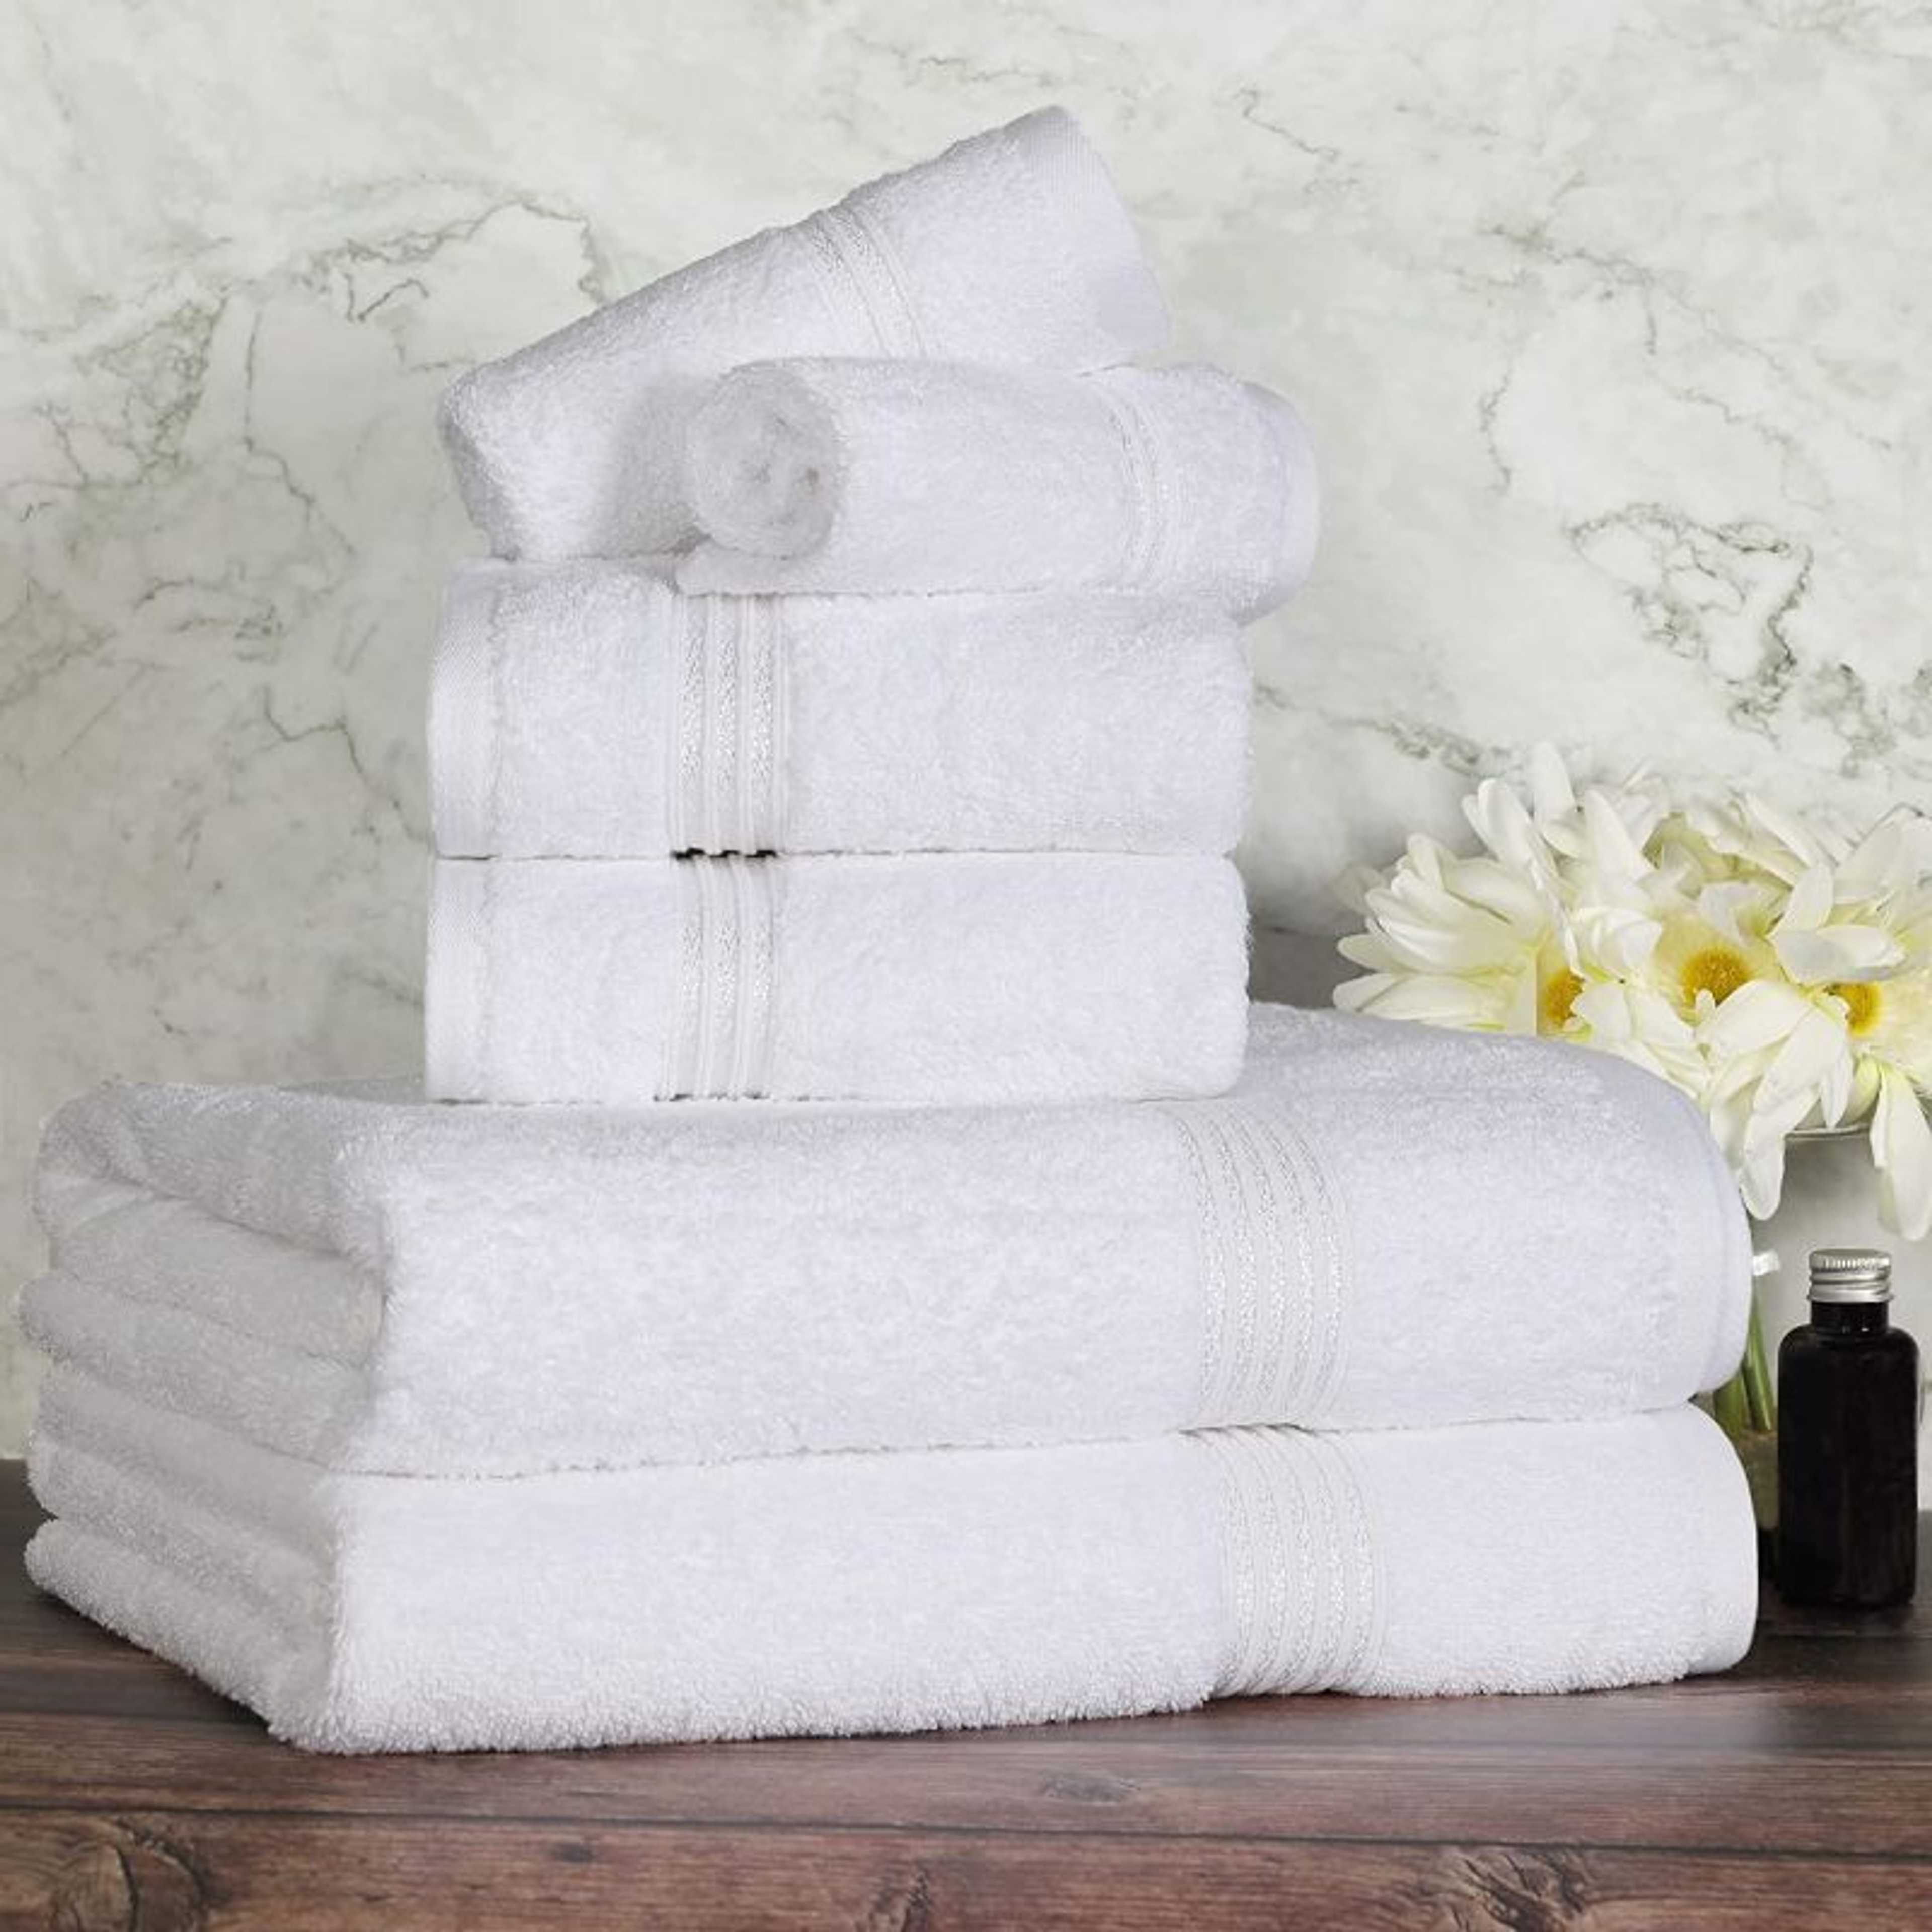 3 pieces Multicolor Bath Towels FOR MEN AND WOMEN - 20 X 40 inches